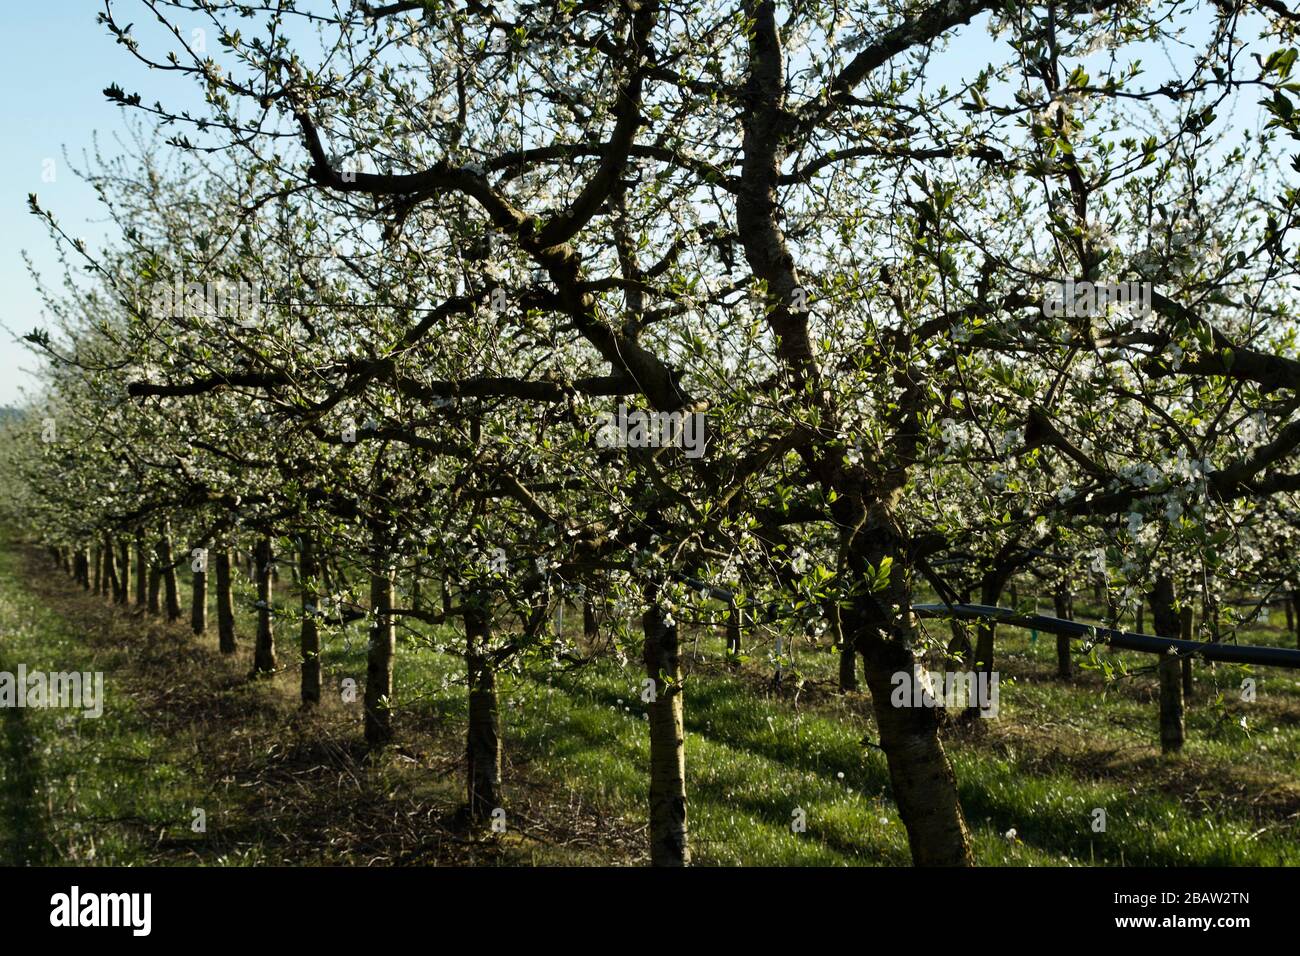 Spring blossom on prune / plum trees of the Prune D'Agen growing area in the Lot-et-Garonne, France. Stock Photo